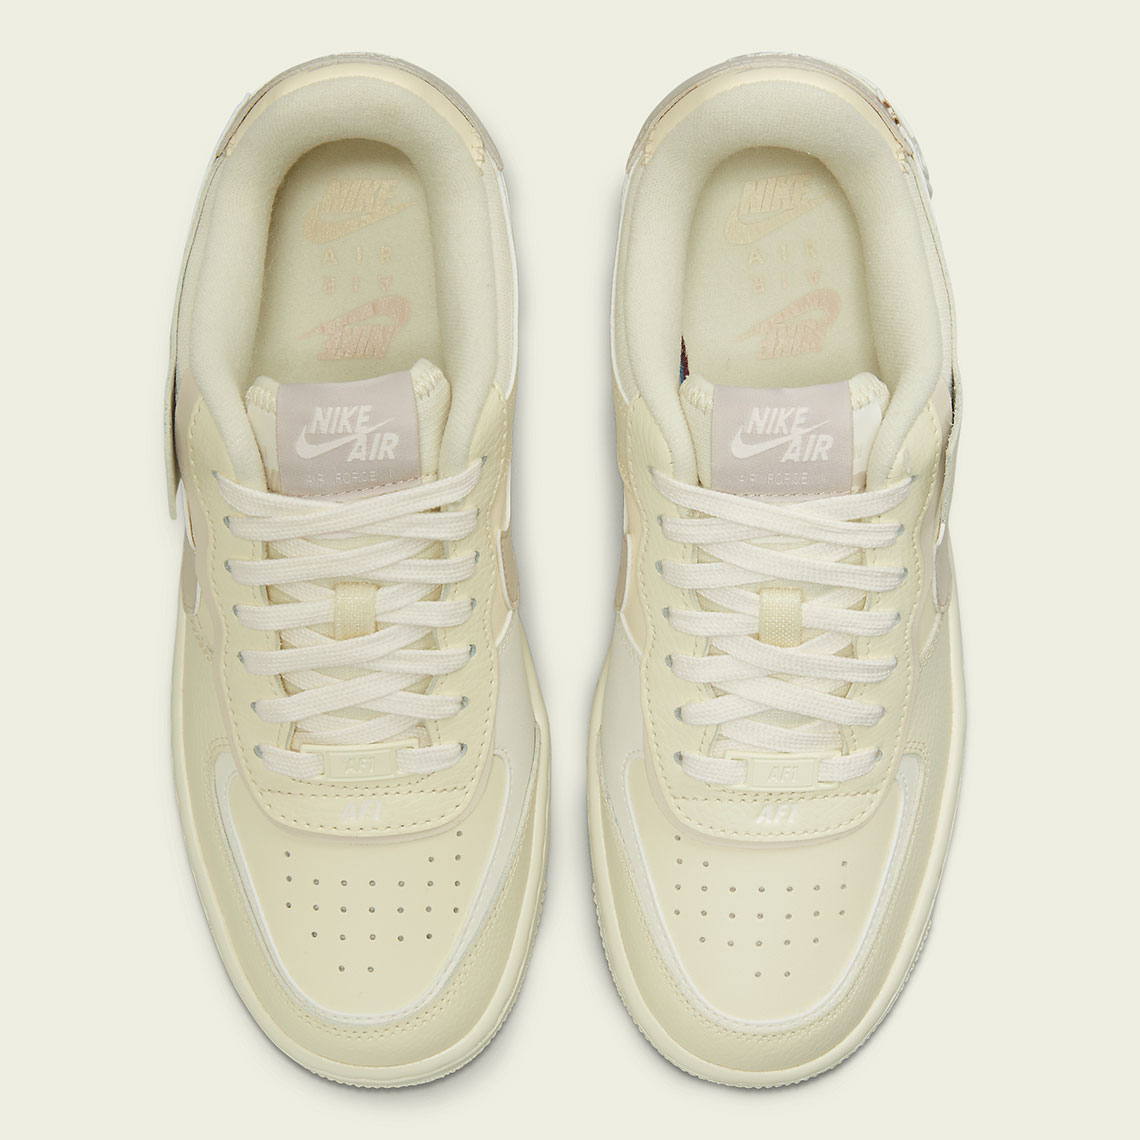 The Nike Air Force 1 Shadow Gets A Full Glass Of “Coconut Milk ...